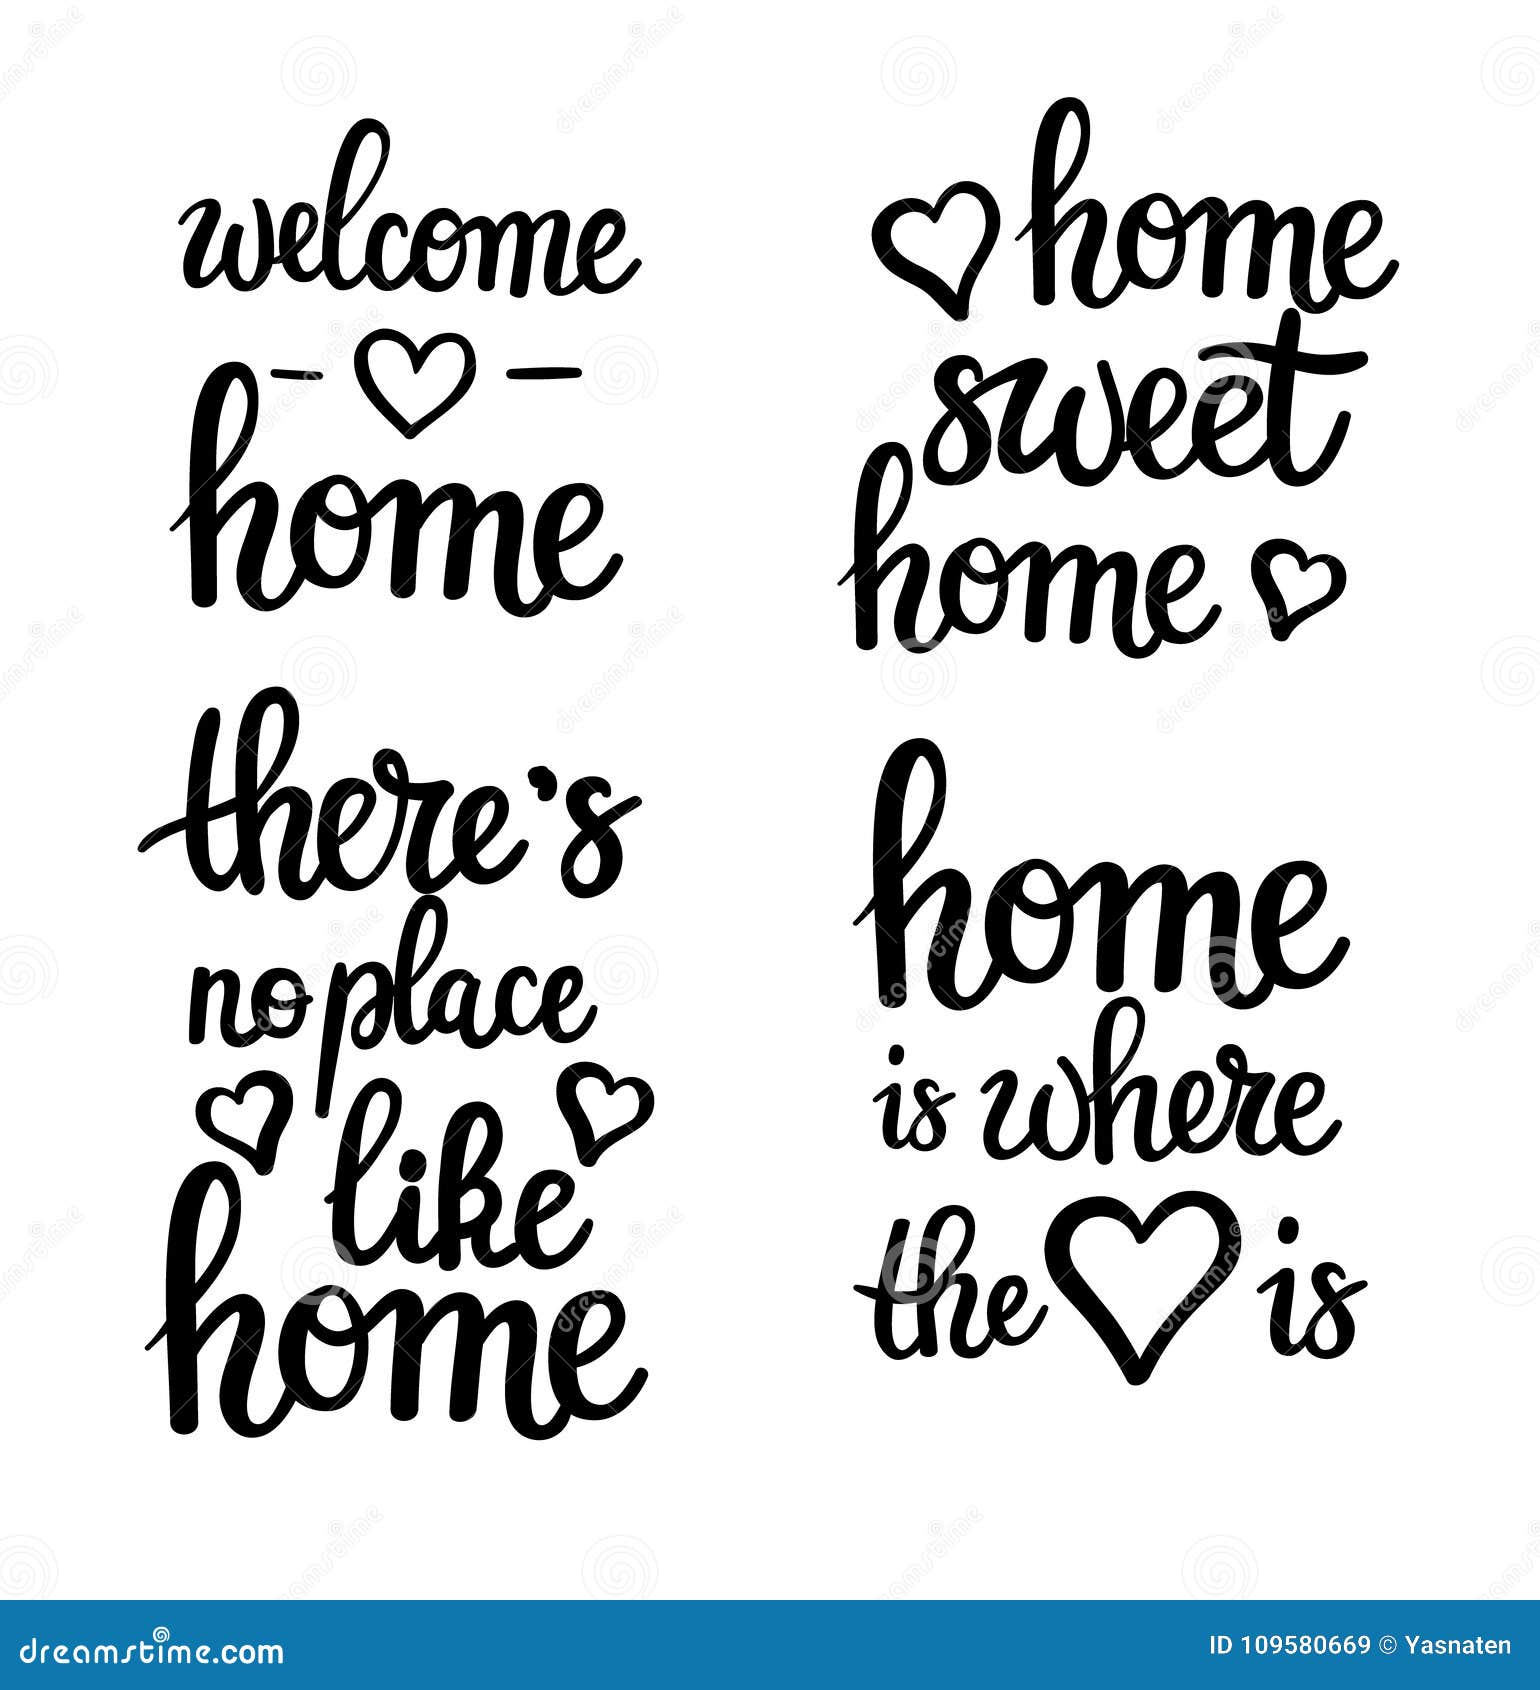 Home Motivational Quotes Stock Illustrations 702 Home Motivational Quotes Stock Illustrations Vectors Clipart Dreamstime